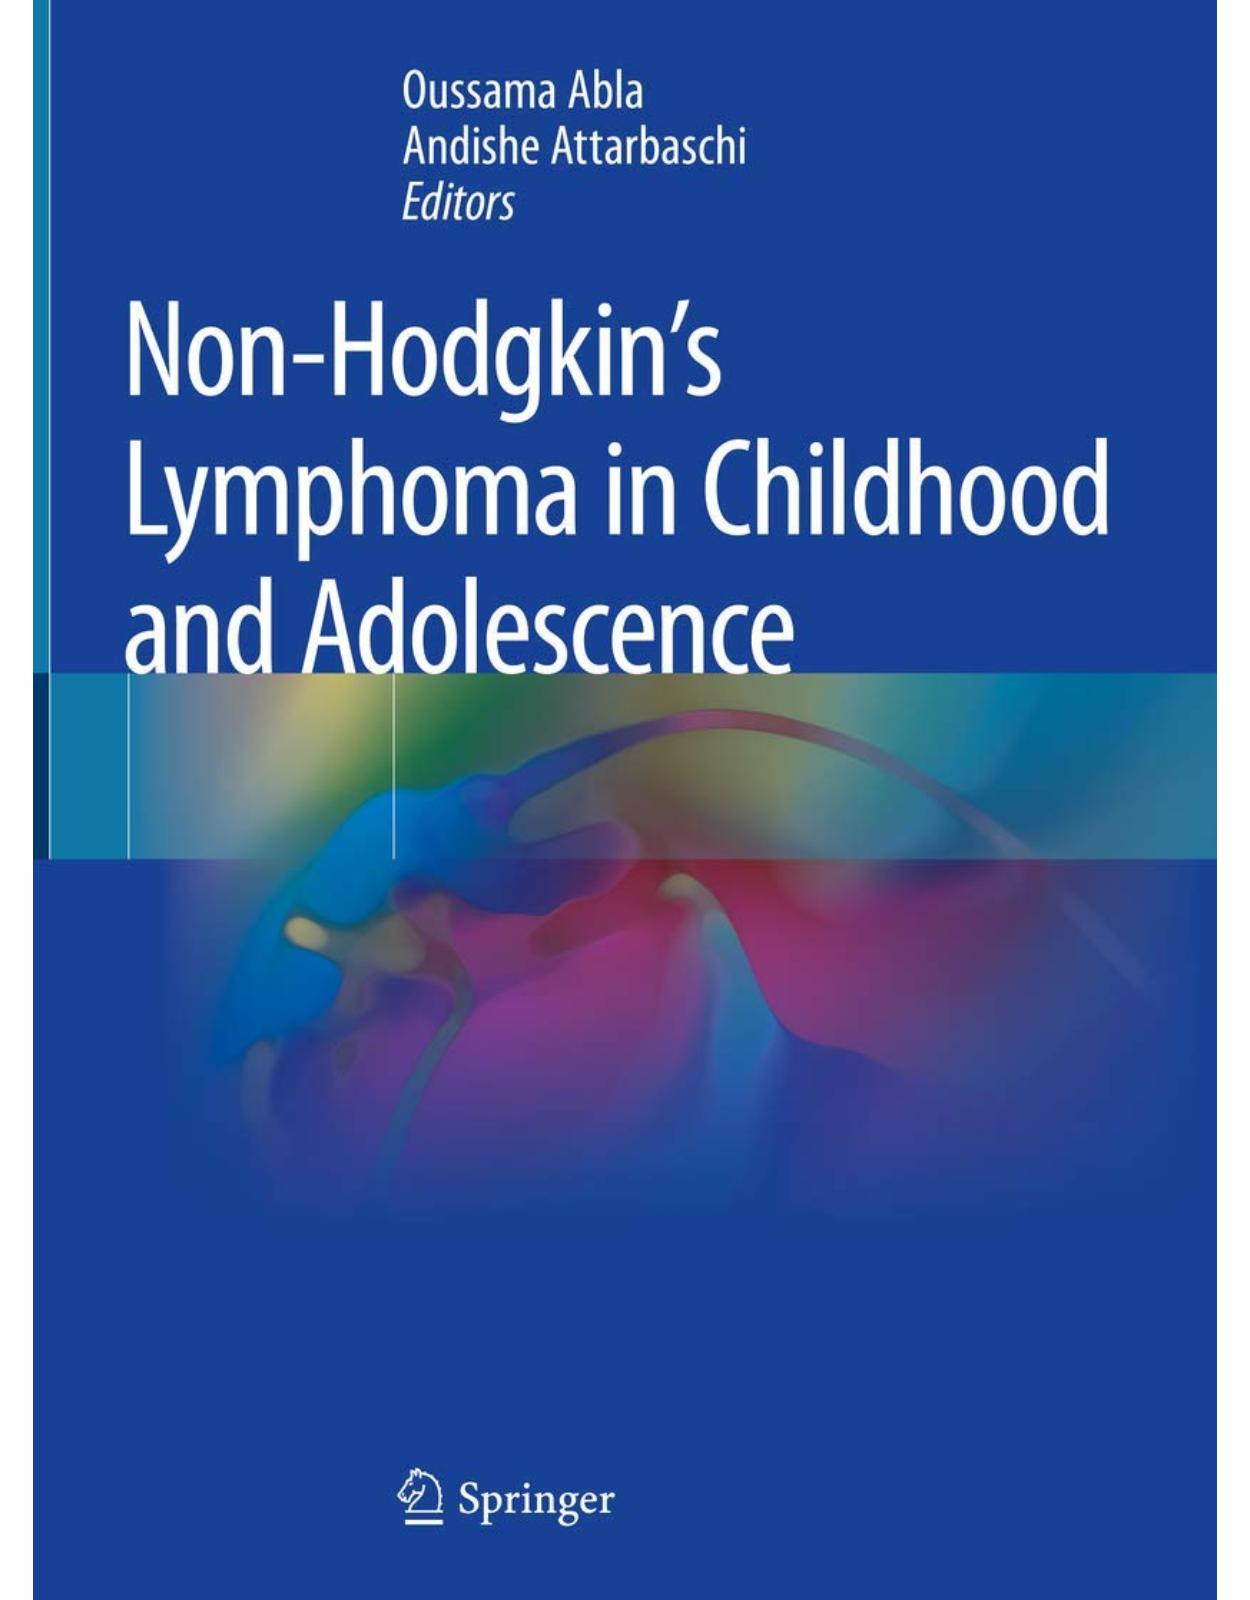 Non-Hodgkin's Lymphoma in Childhood and Adolescence